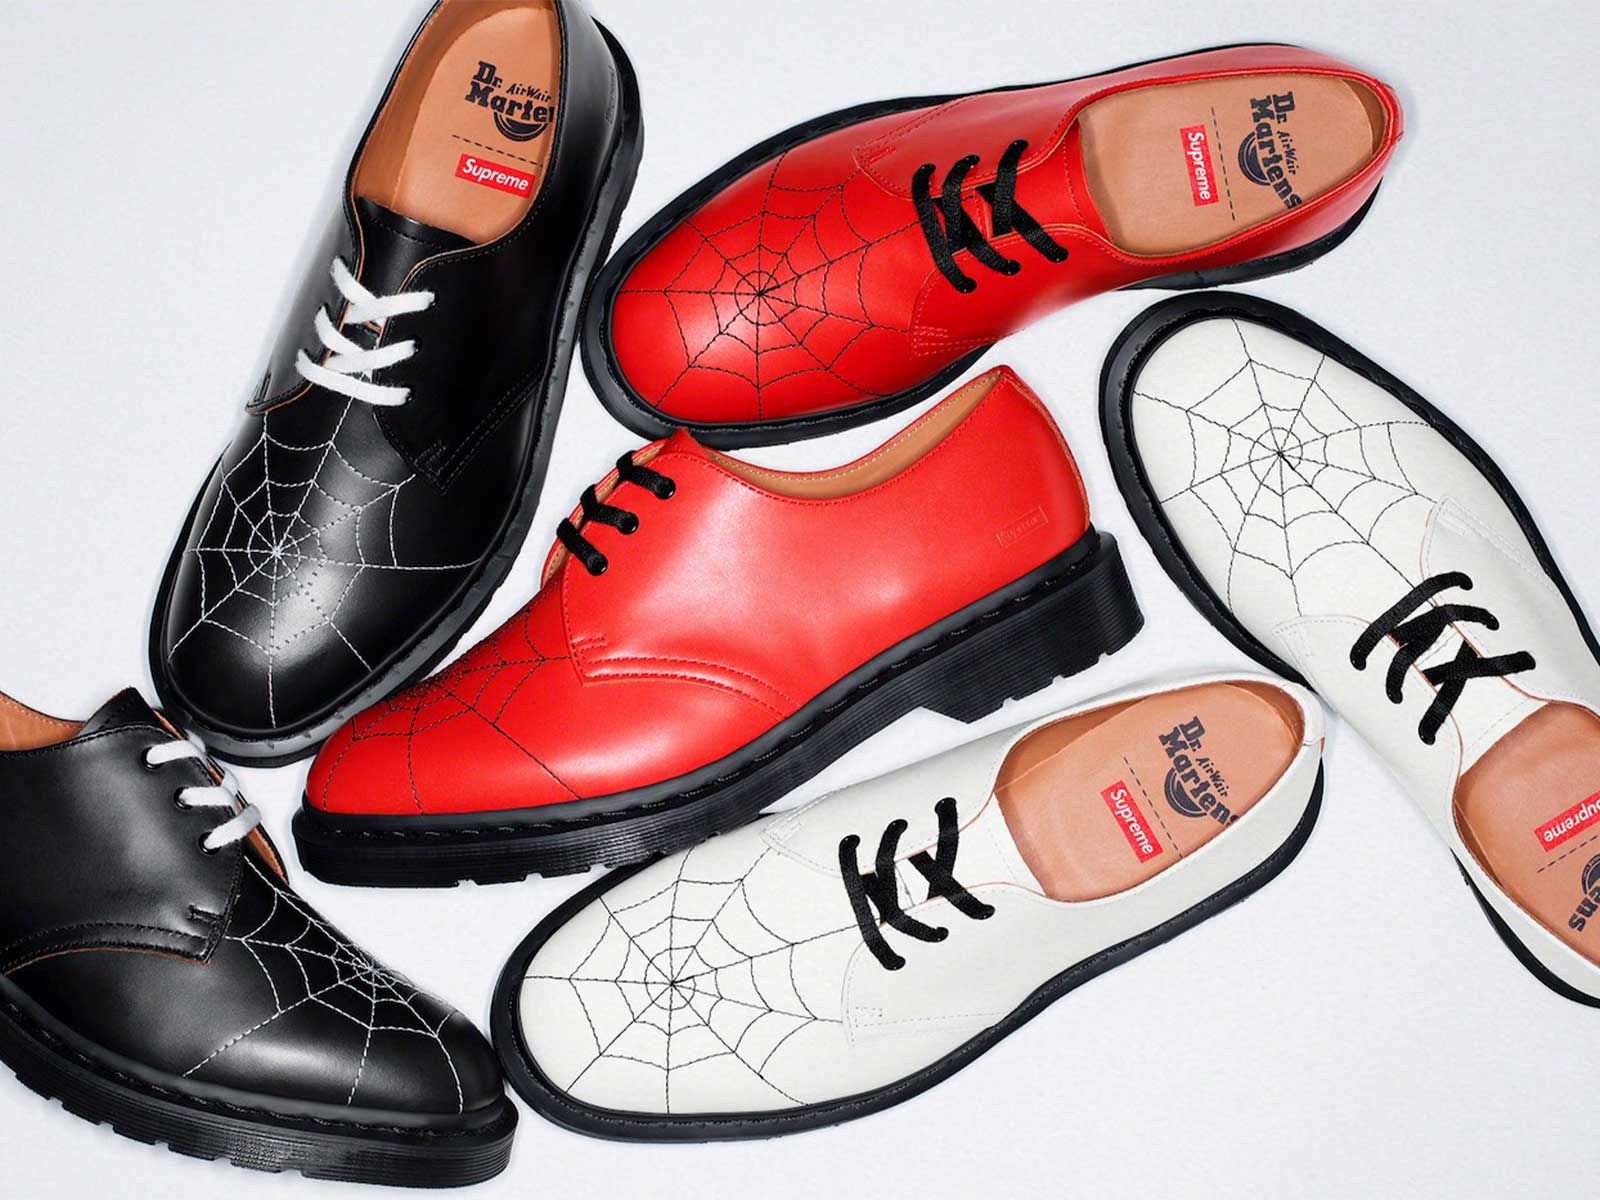 Supreme and Dr. Martens reunite in three new silhouettes